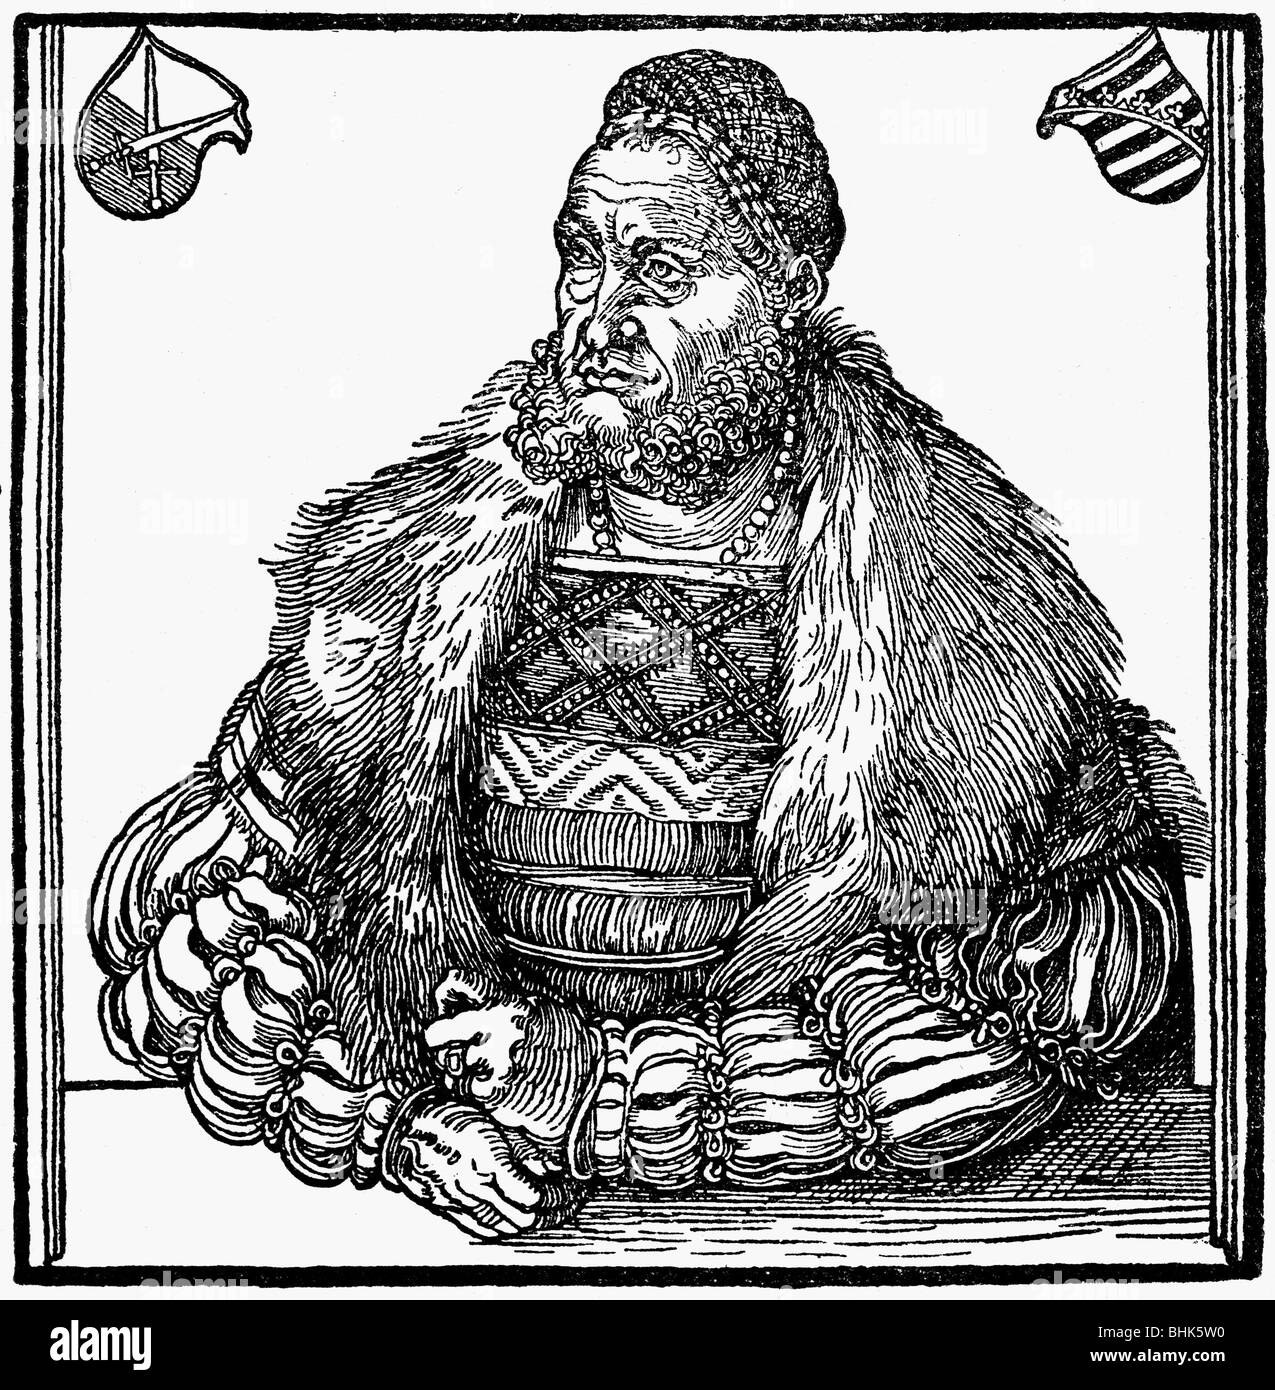 Frederick III 'the Wise', 17.1.1486 - 5.5.1525, Elector of Saxony 26.8.1486 - 5.5.1525, half length, woodcut by Lucas Cranach the Elder, 1510, , Stock Photo